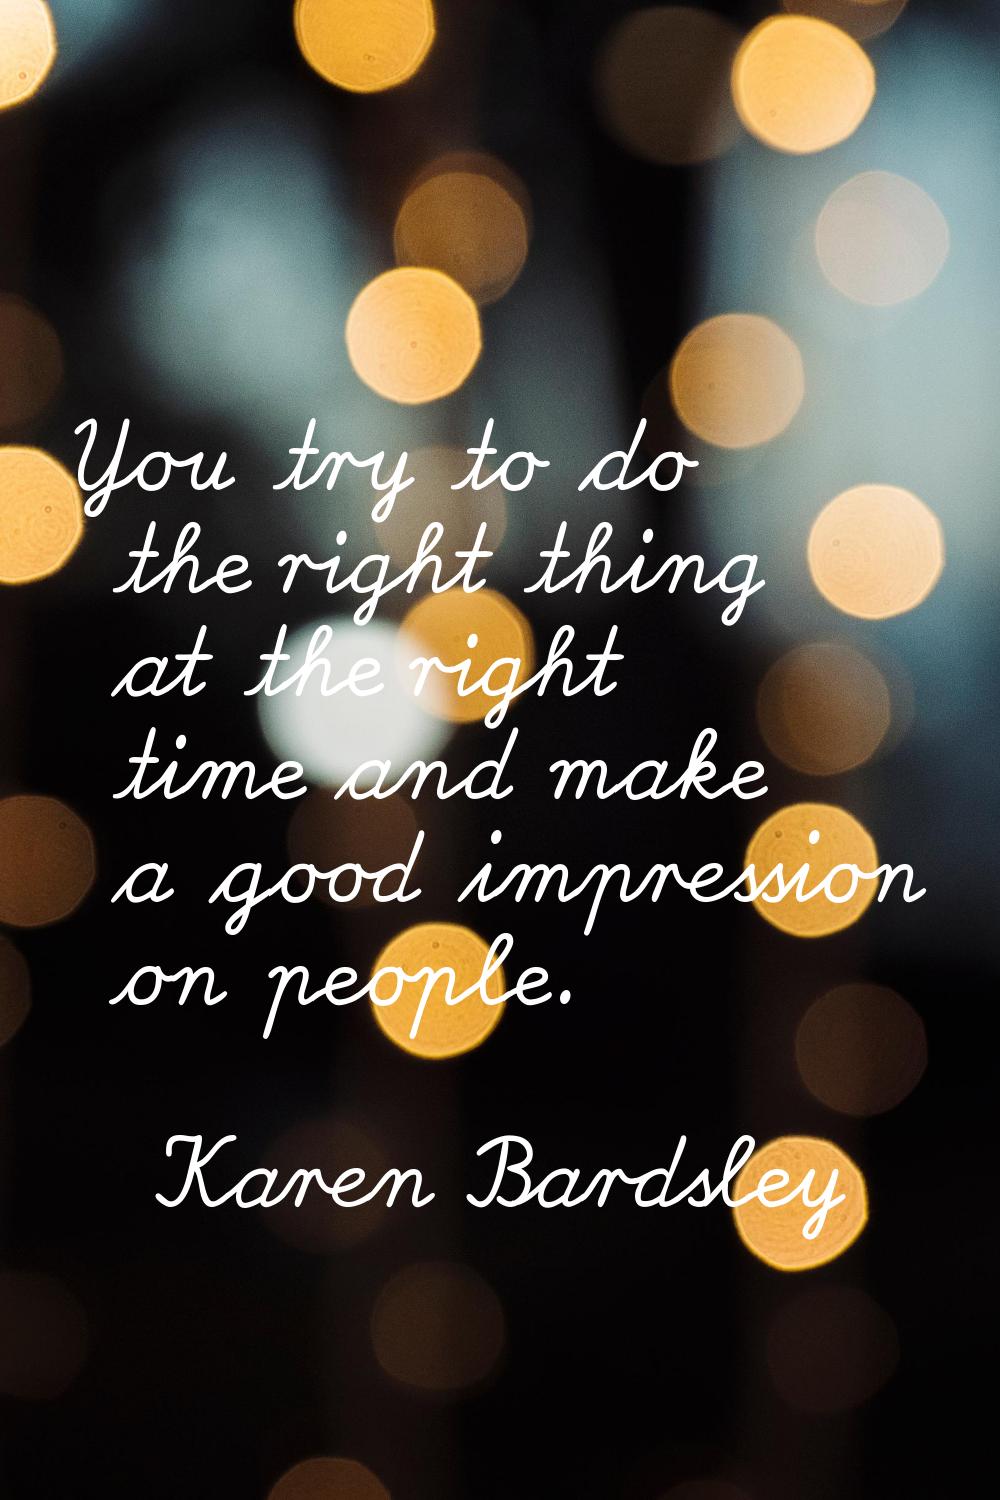 You try to do the right thing at the right time and make a good impression on people.